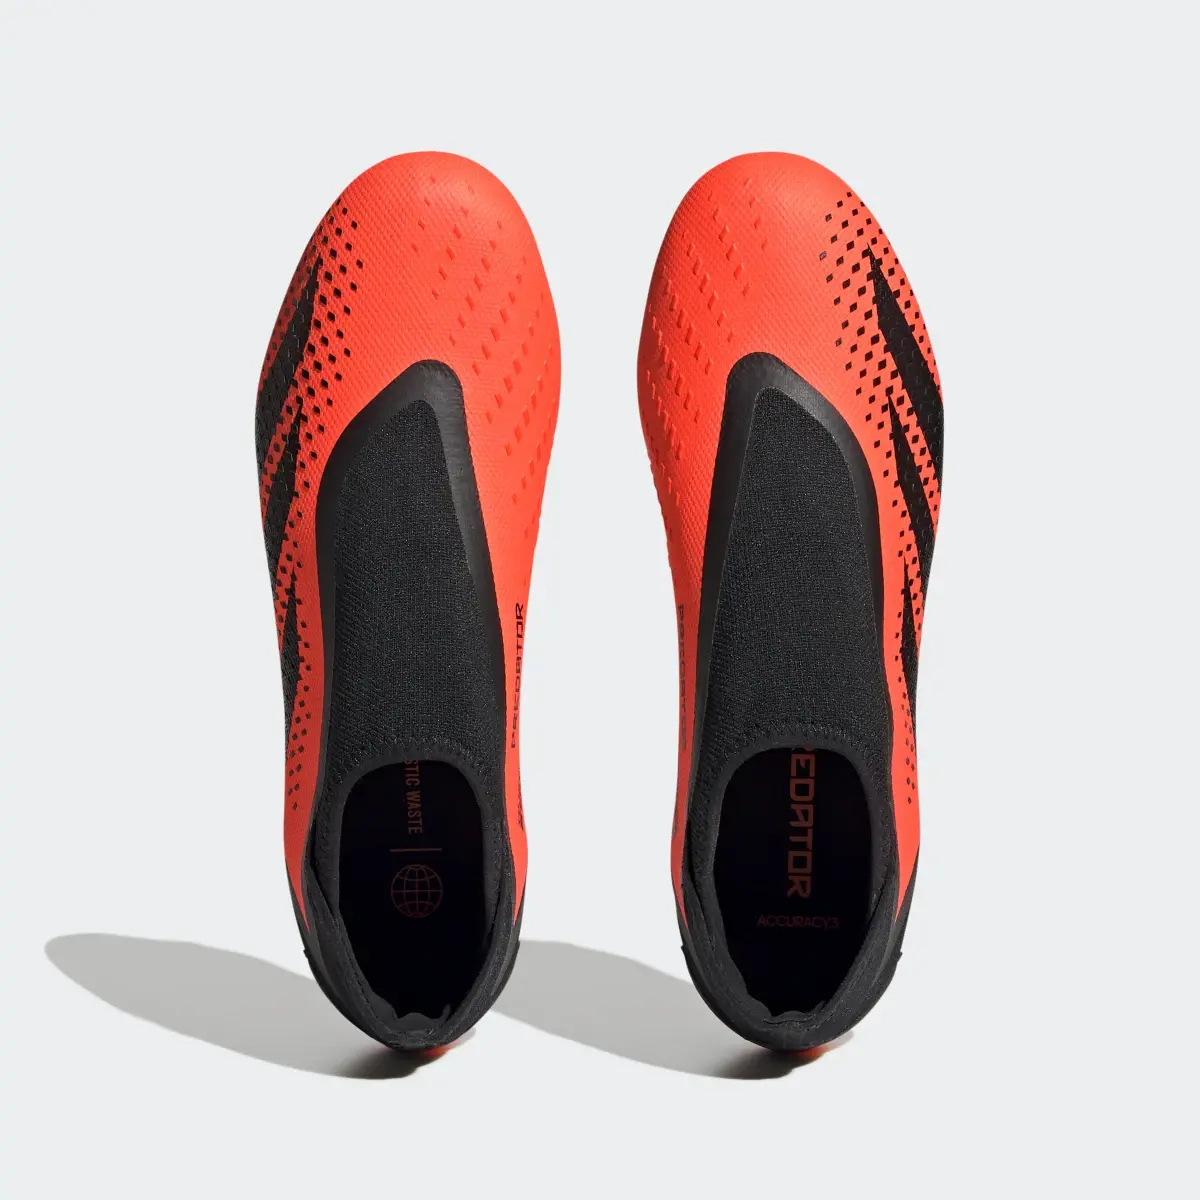 Adidas Predator Accuracy.3 Laceless Firm Ground Cleats. 3